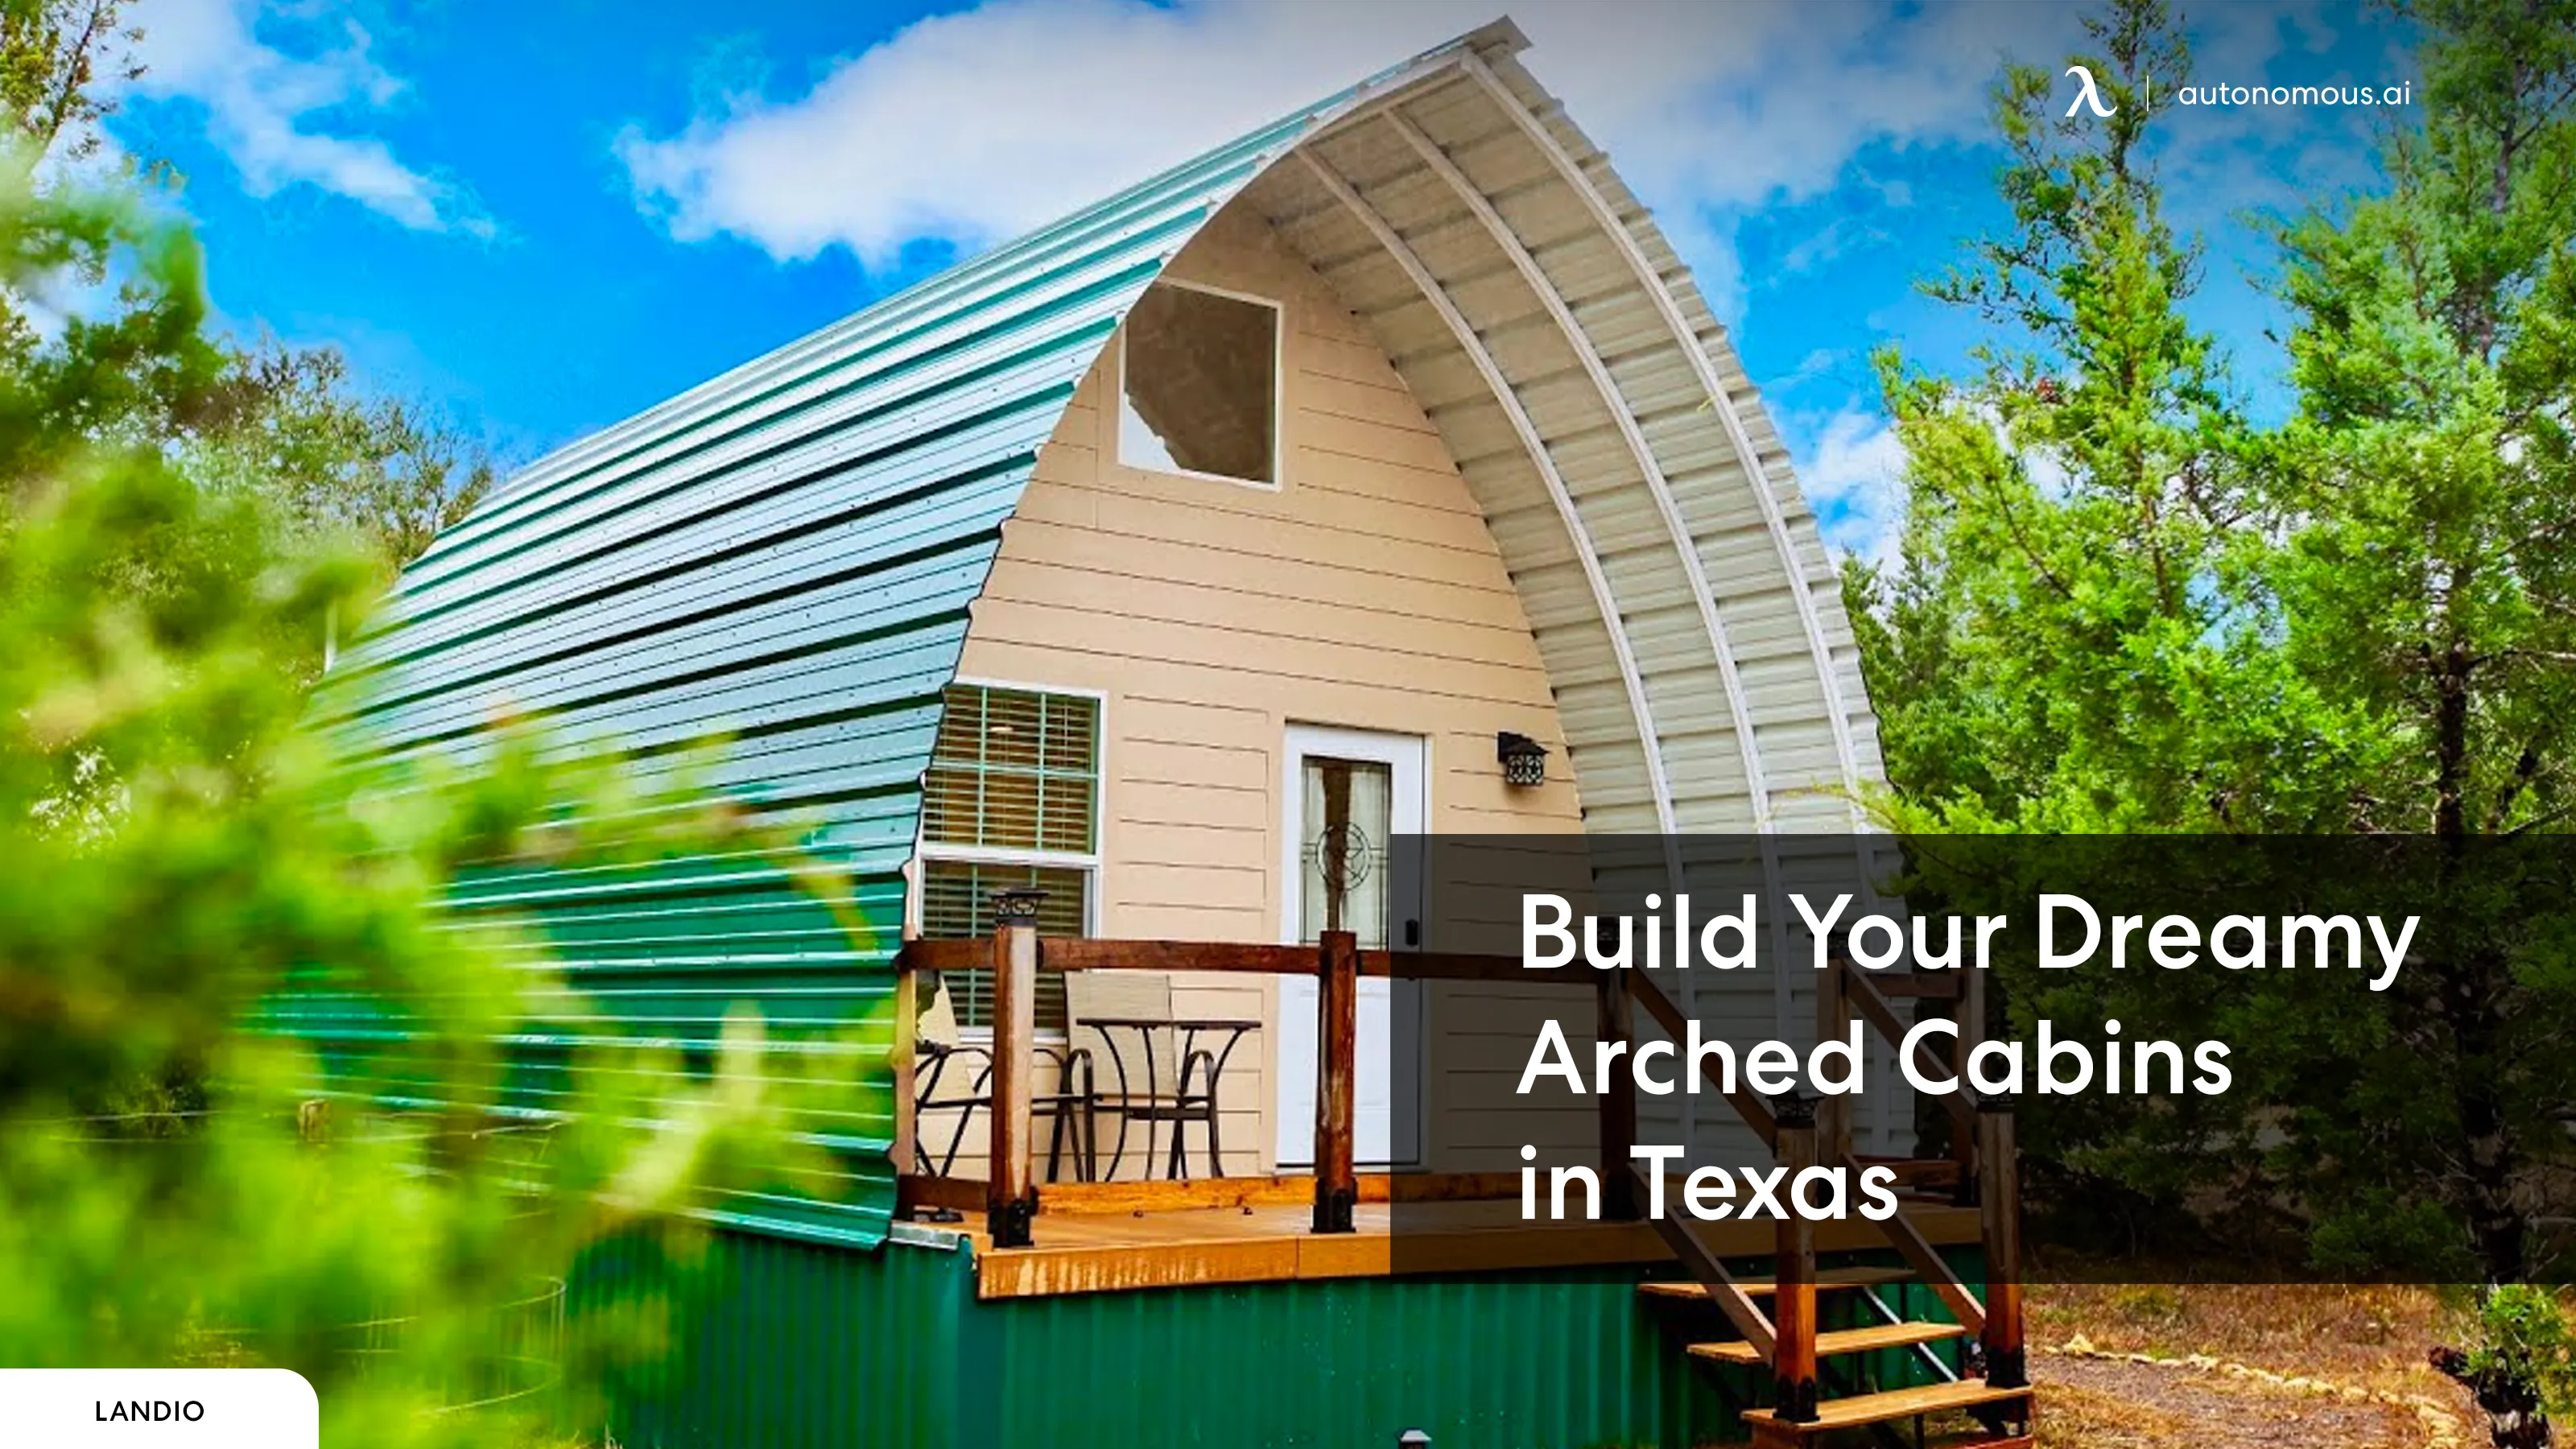 Discover Unique Arched Cabins Designs in Texas